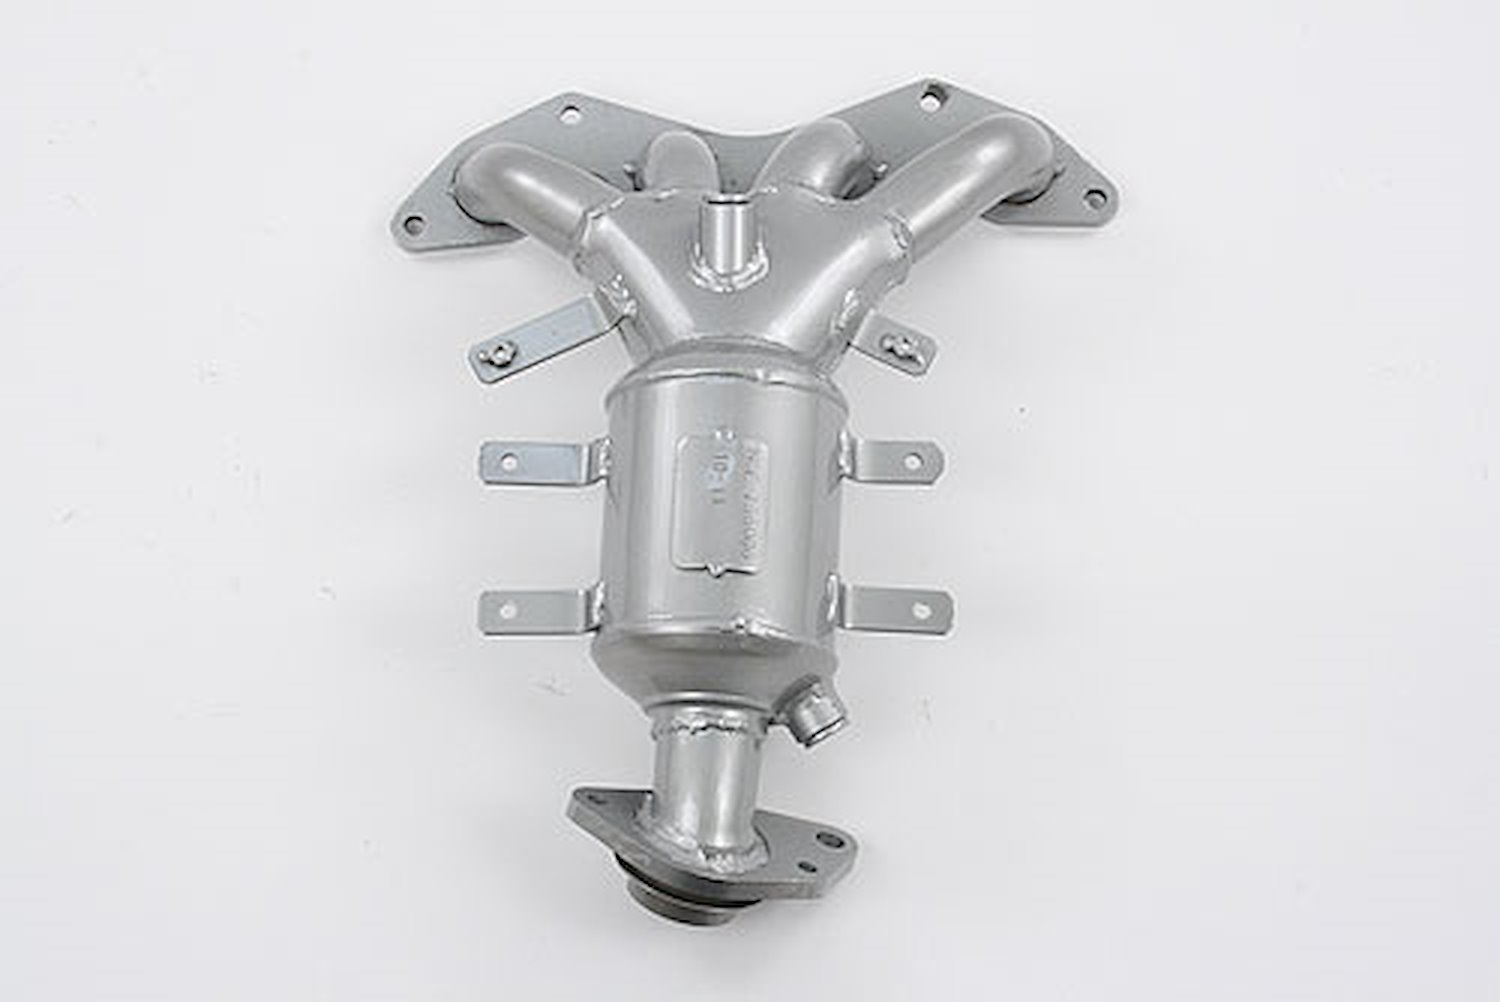 Pacesetter Manifold Converter, Direct replacement of OEM, Stainless Steel, Low Restriction Tubular Manifold Design